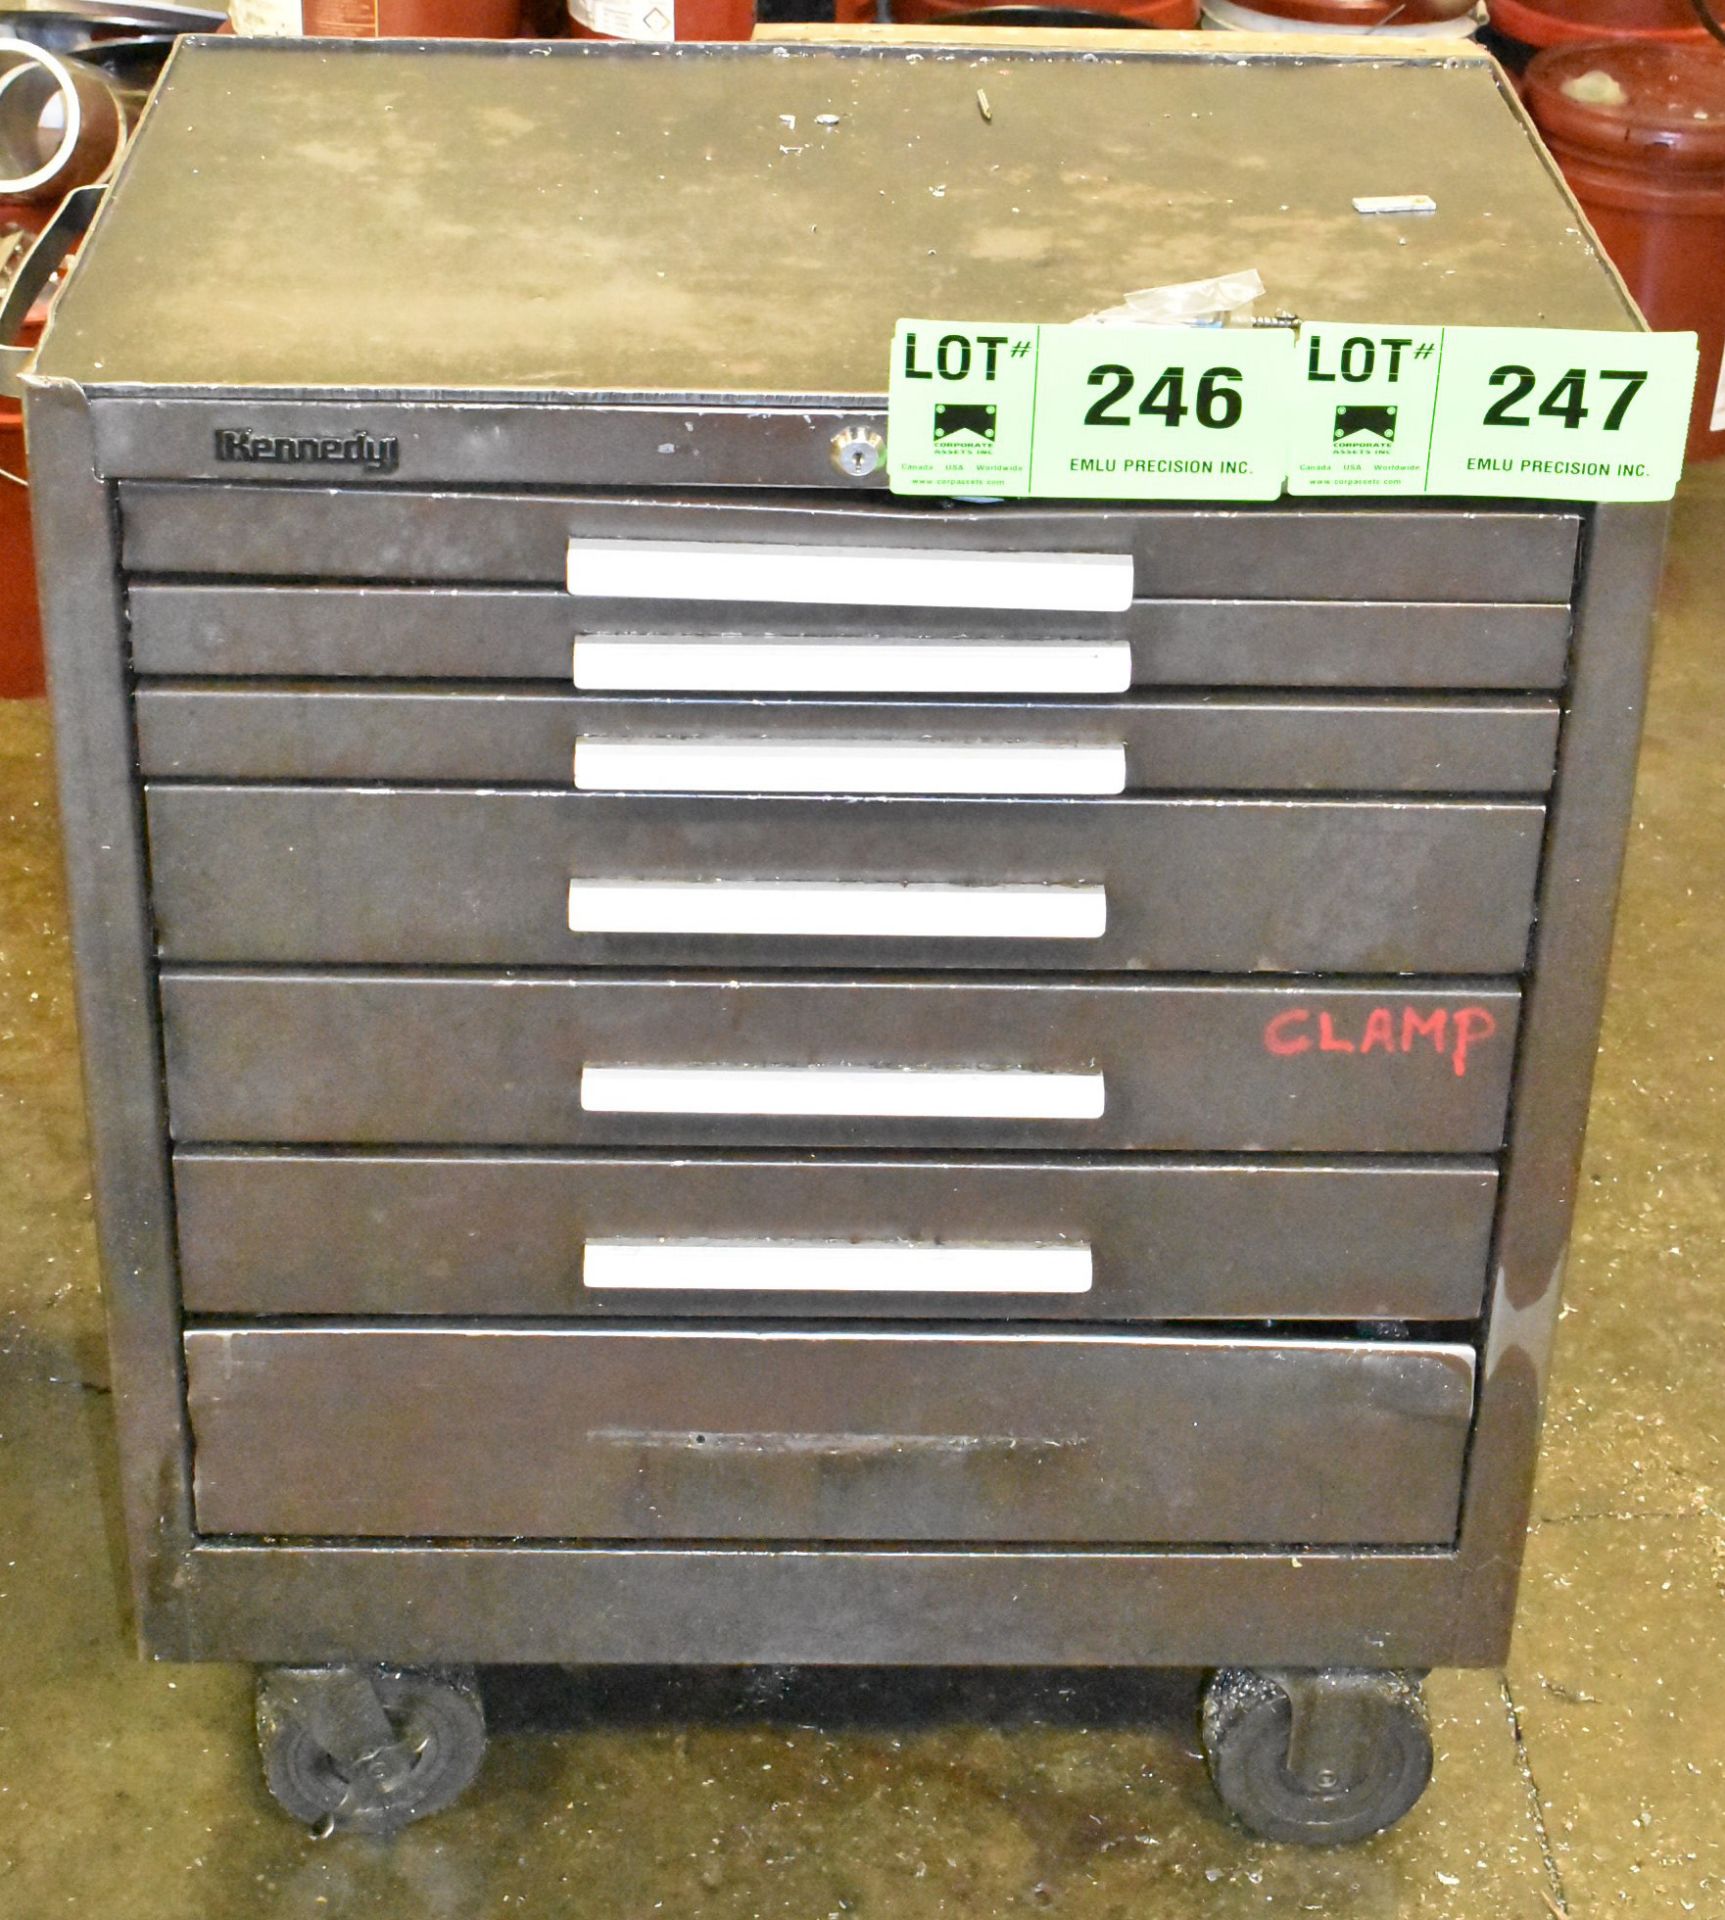 KENNEDY 7-DRAWER ROLLING TOOL CABINET, S/N N/A (CONTENTS NOT INCLUDED)